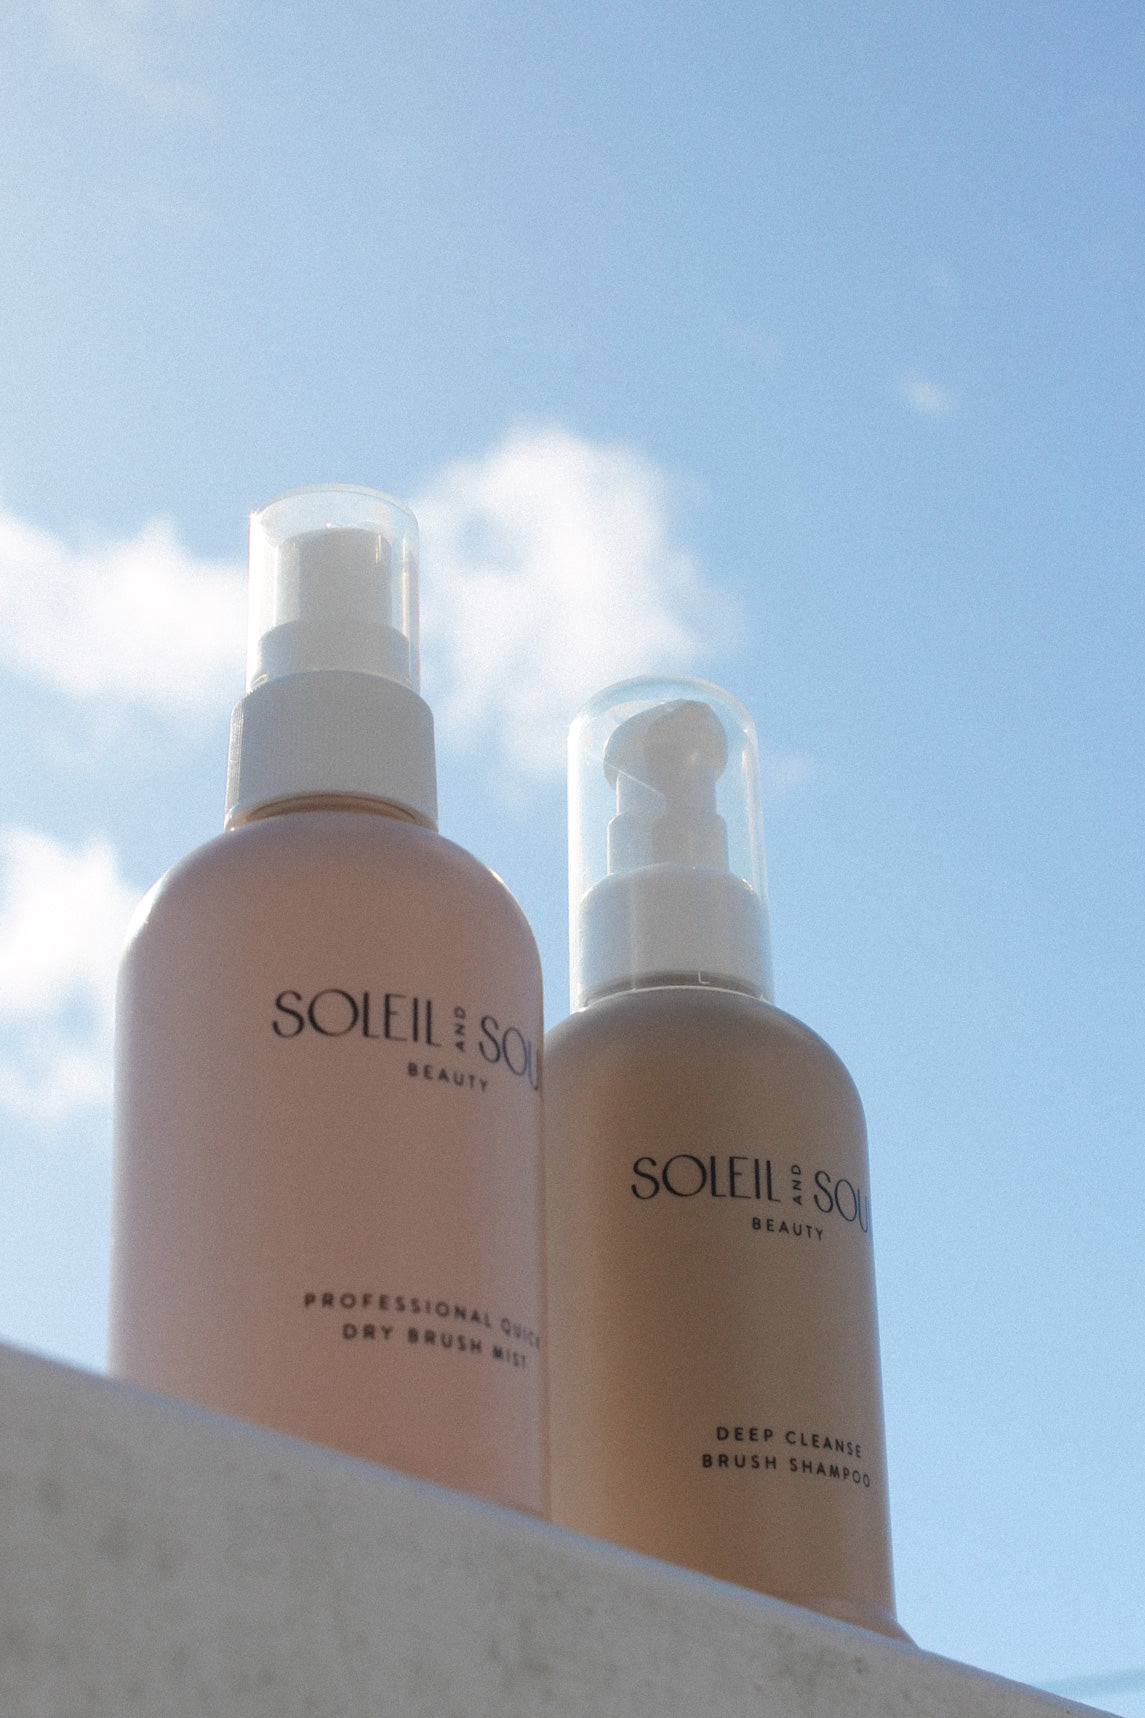 Professional Quick Dry Brush Mist - Soleil and Soul Beauty